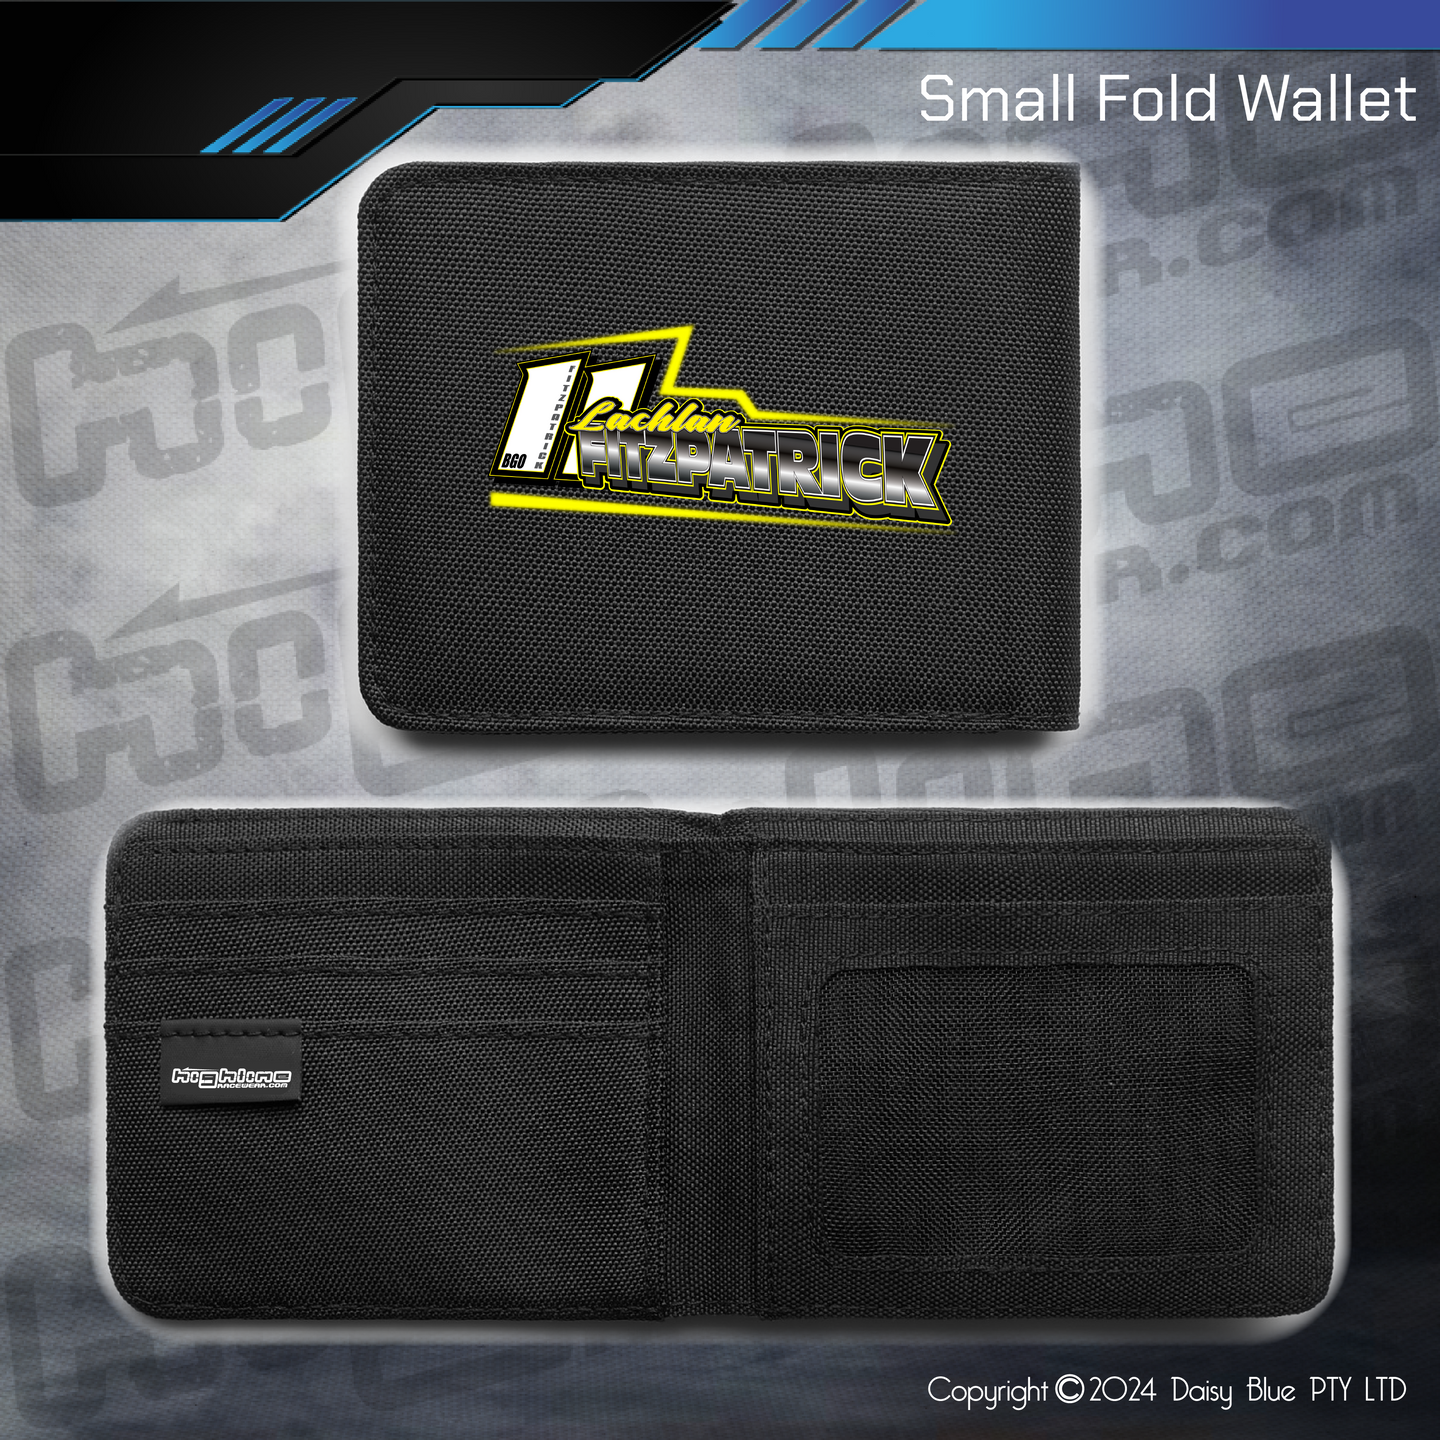 Compact Wallet - Lachlan Fitzpatrick